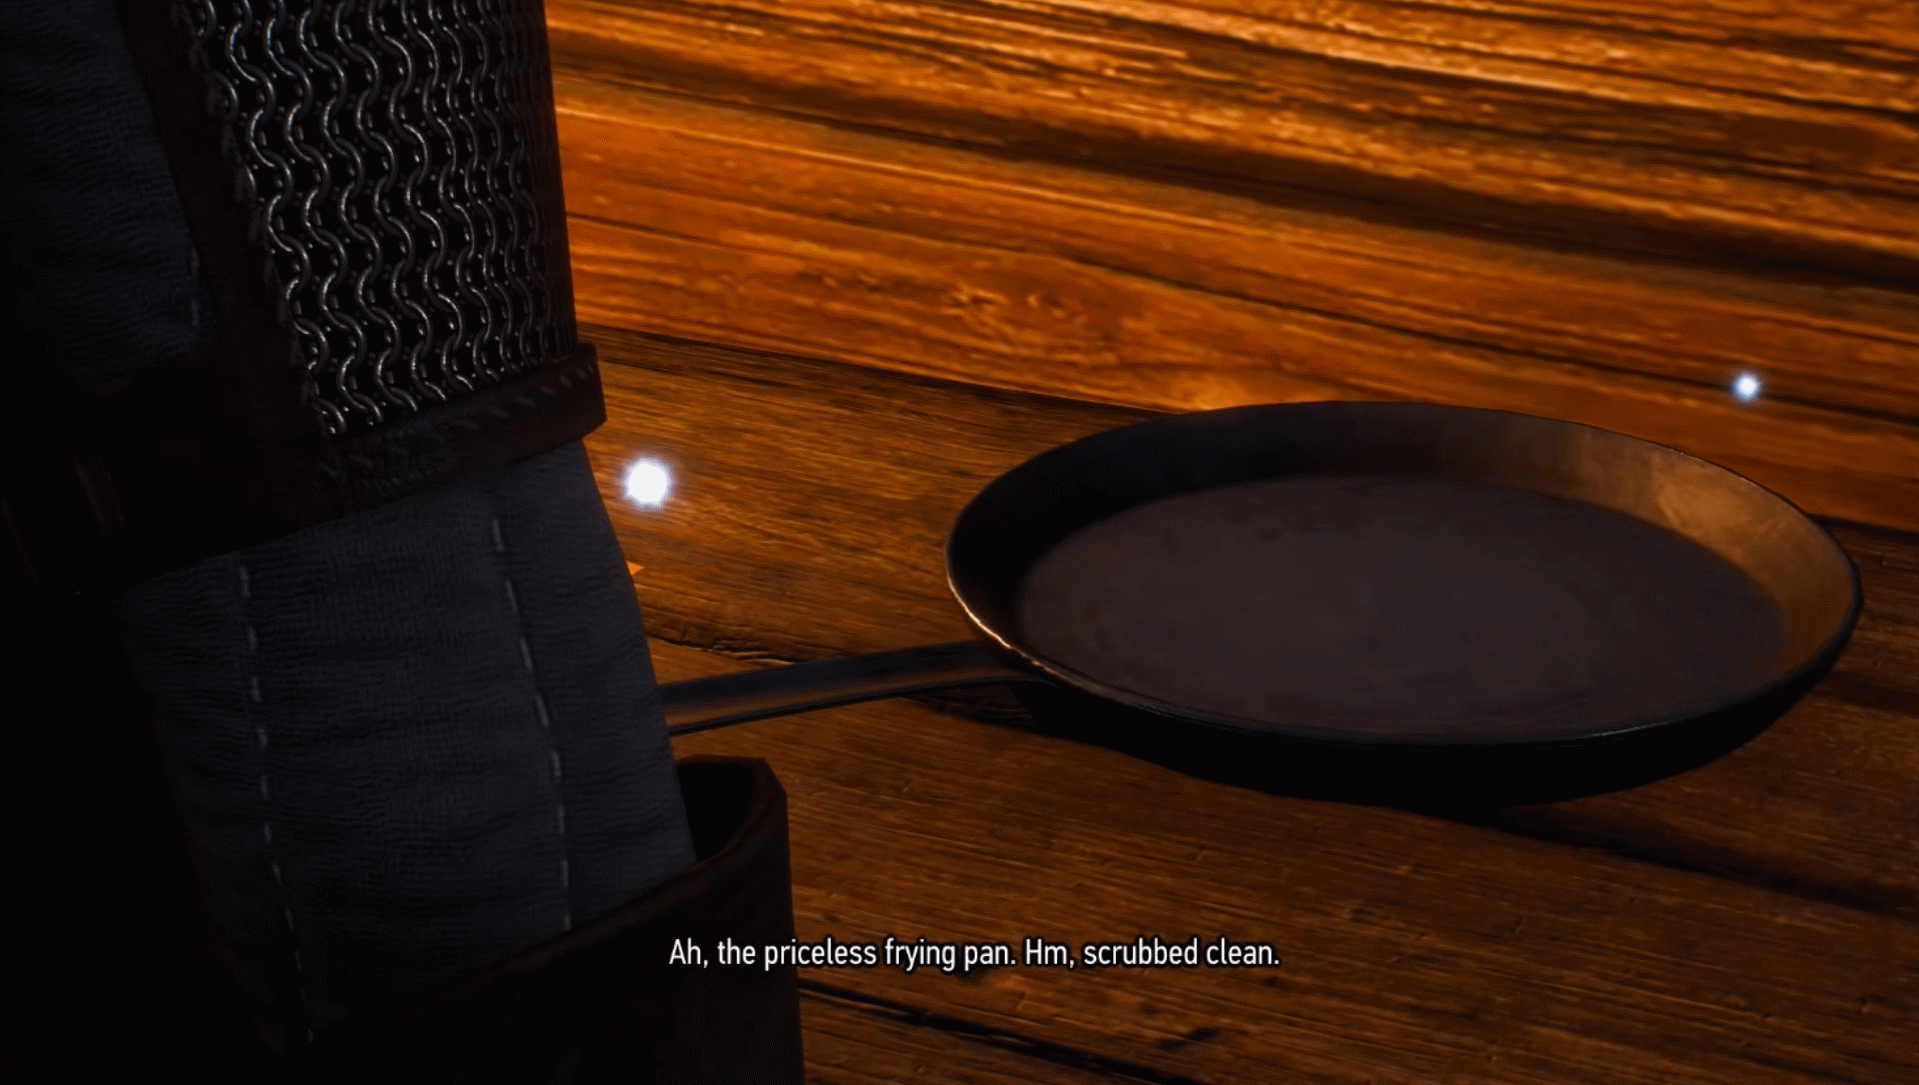 The Witcher 3 quest - A Frying Pan, Spick and Span